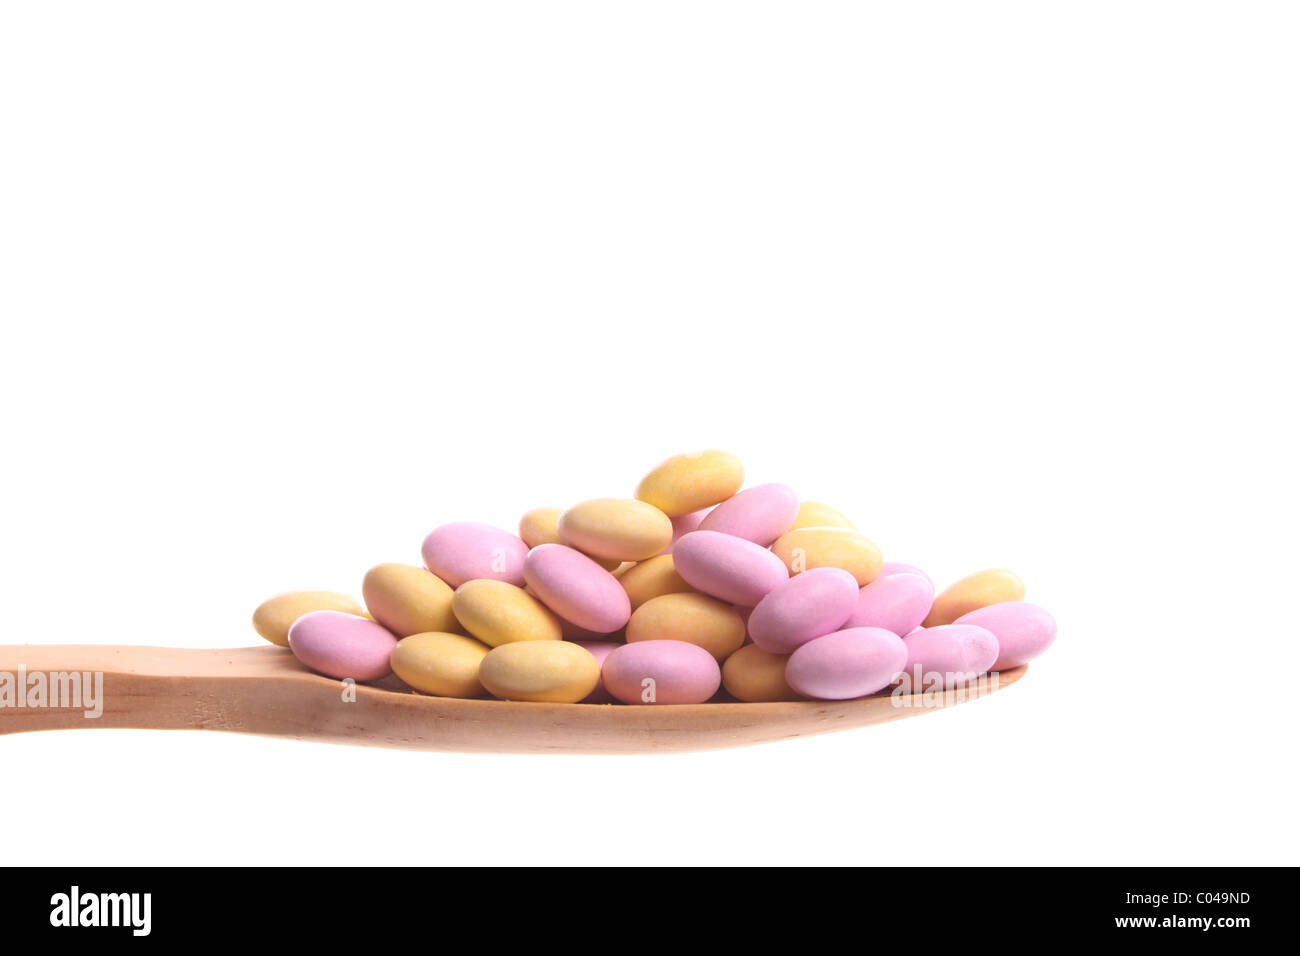 Sweeties simply offered on a wooden spoon isolated on a white background Stock Photo